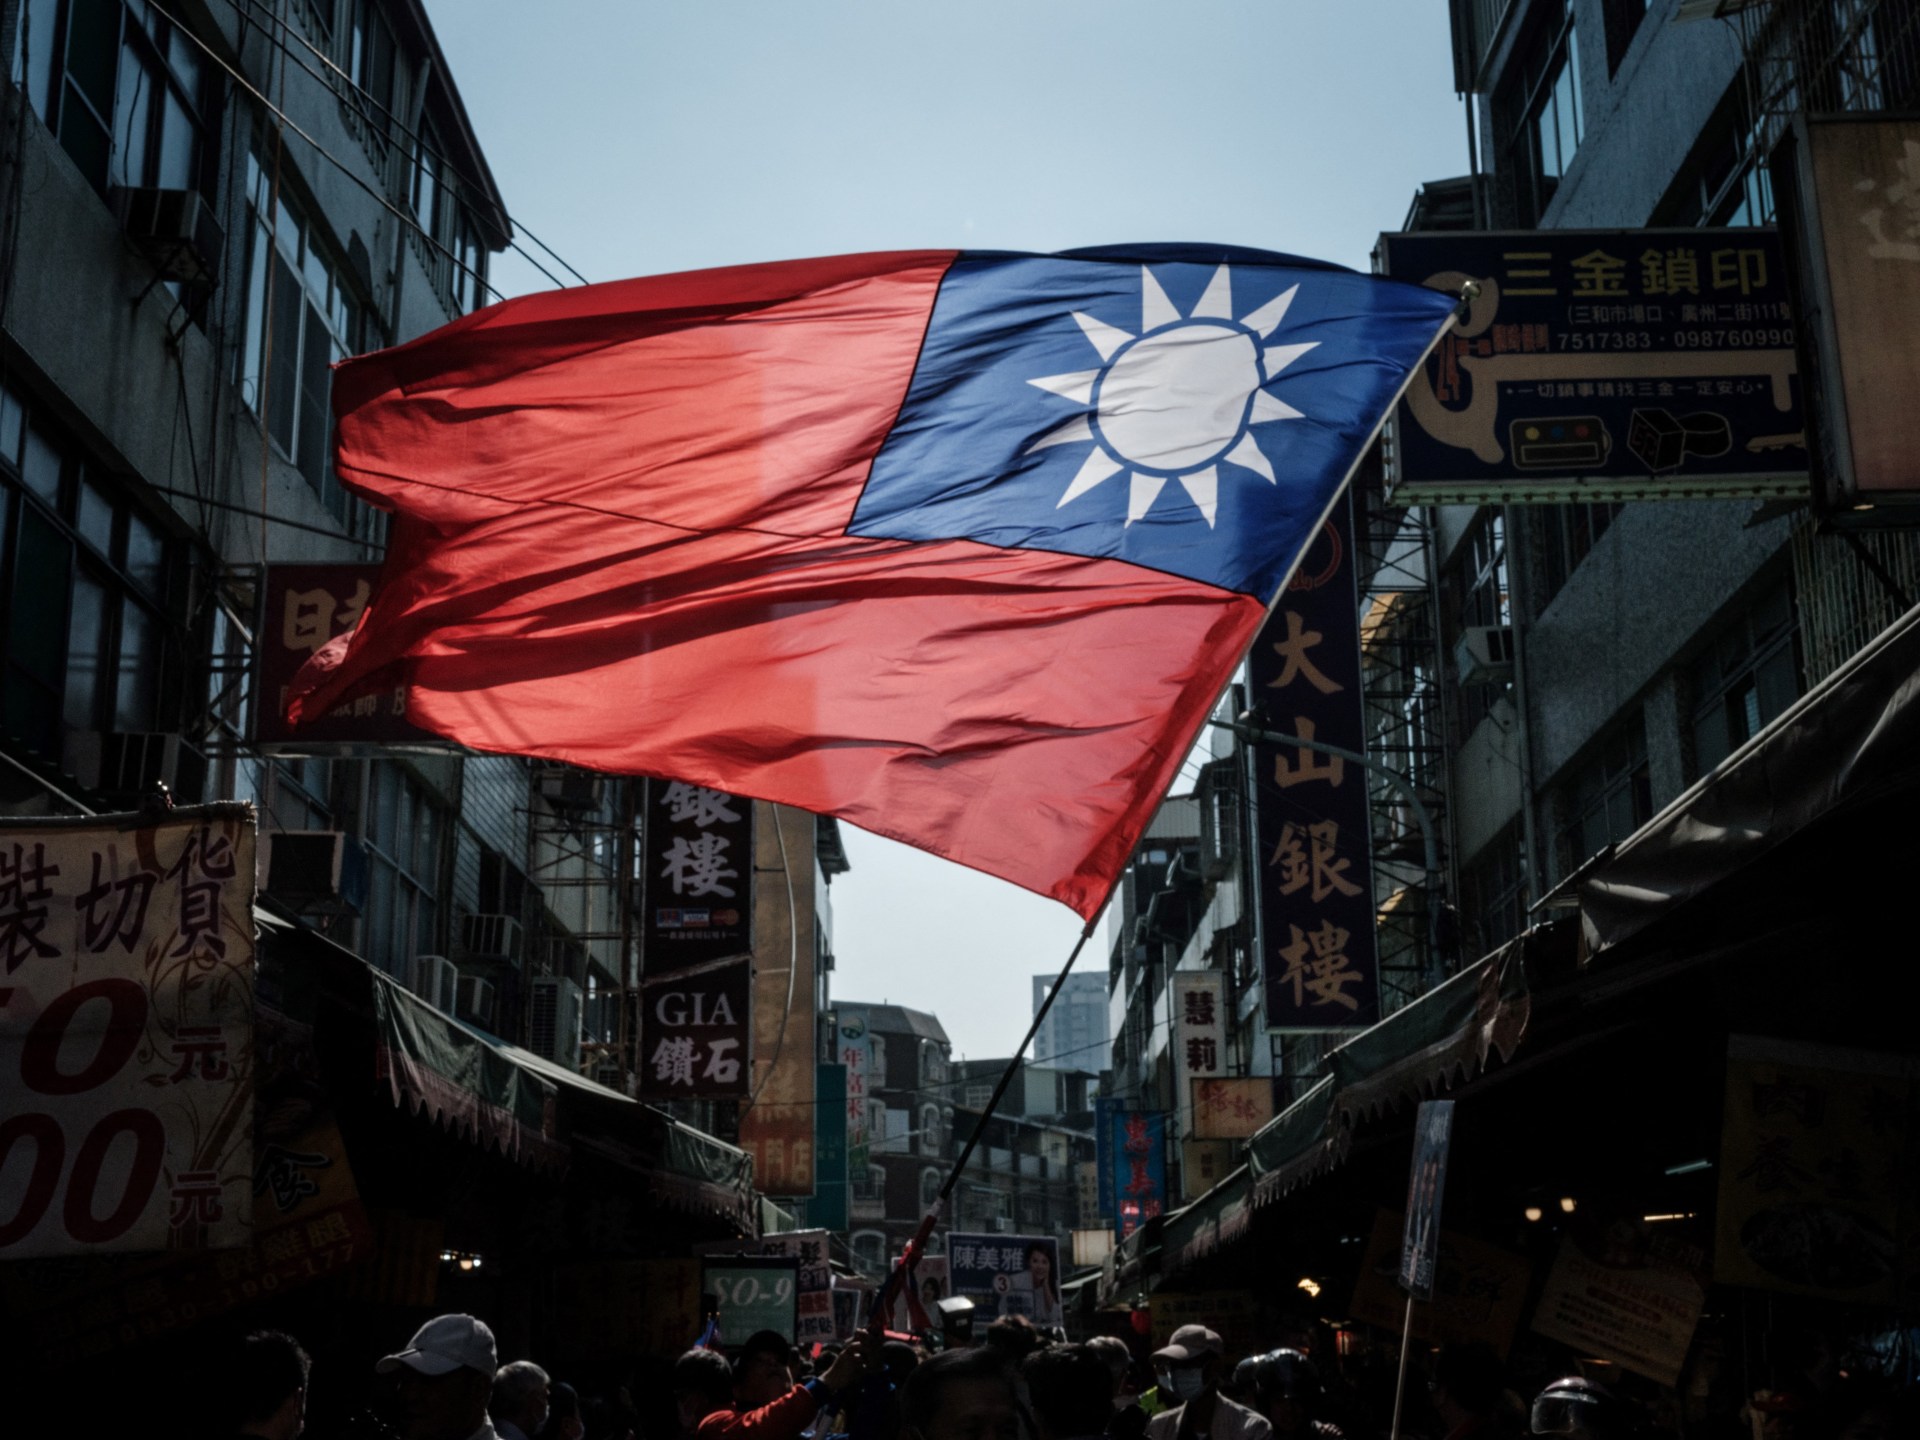 ‘A country but not a country’: Taiwan prepares to vote in China’s shadow | Elections News